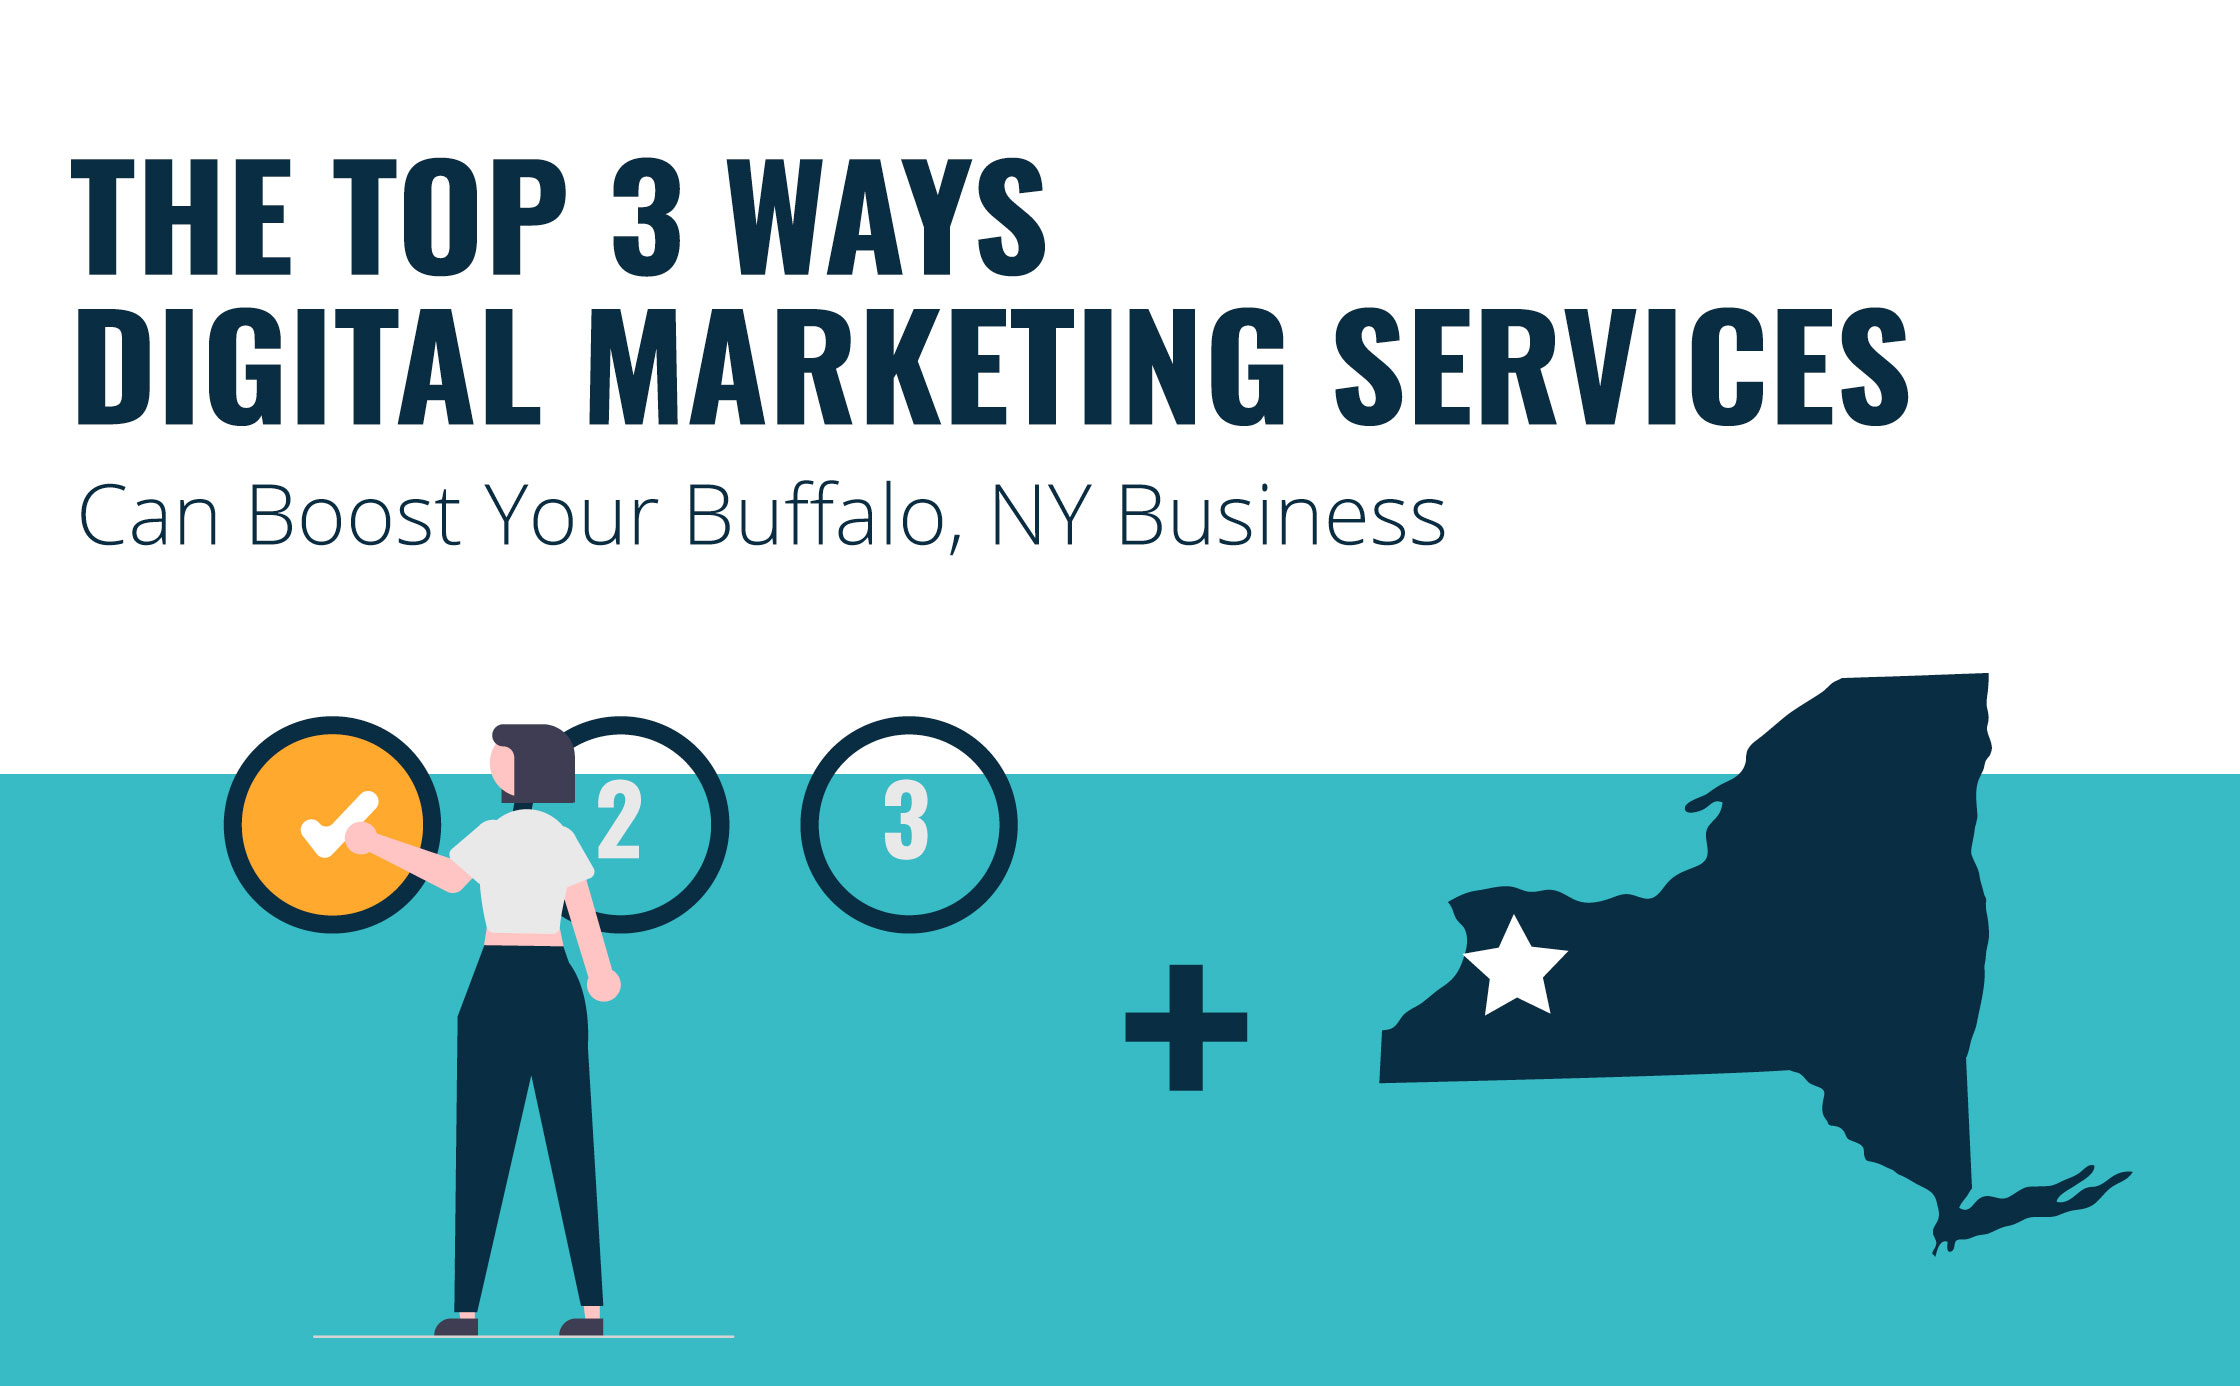 Top 3 Ways Digital Marketing Services Can Boost Your Buffalo, NY Business